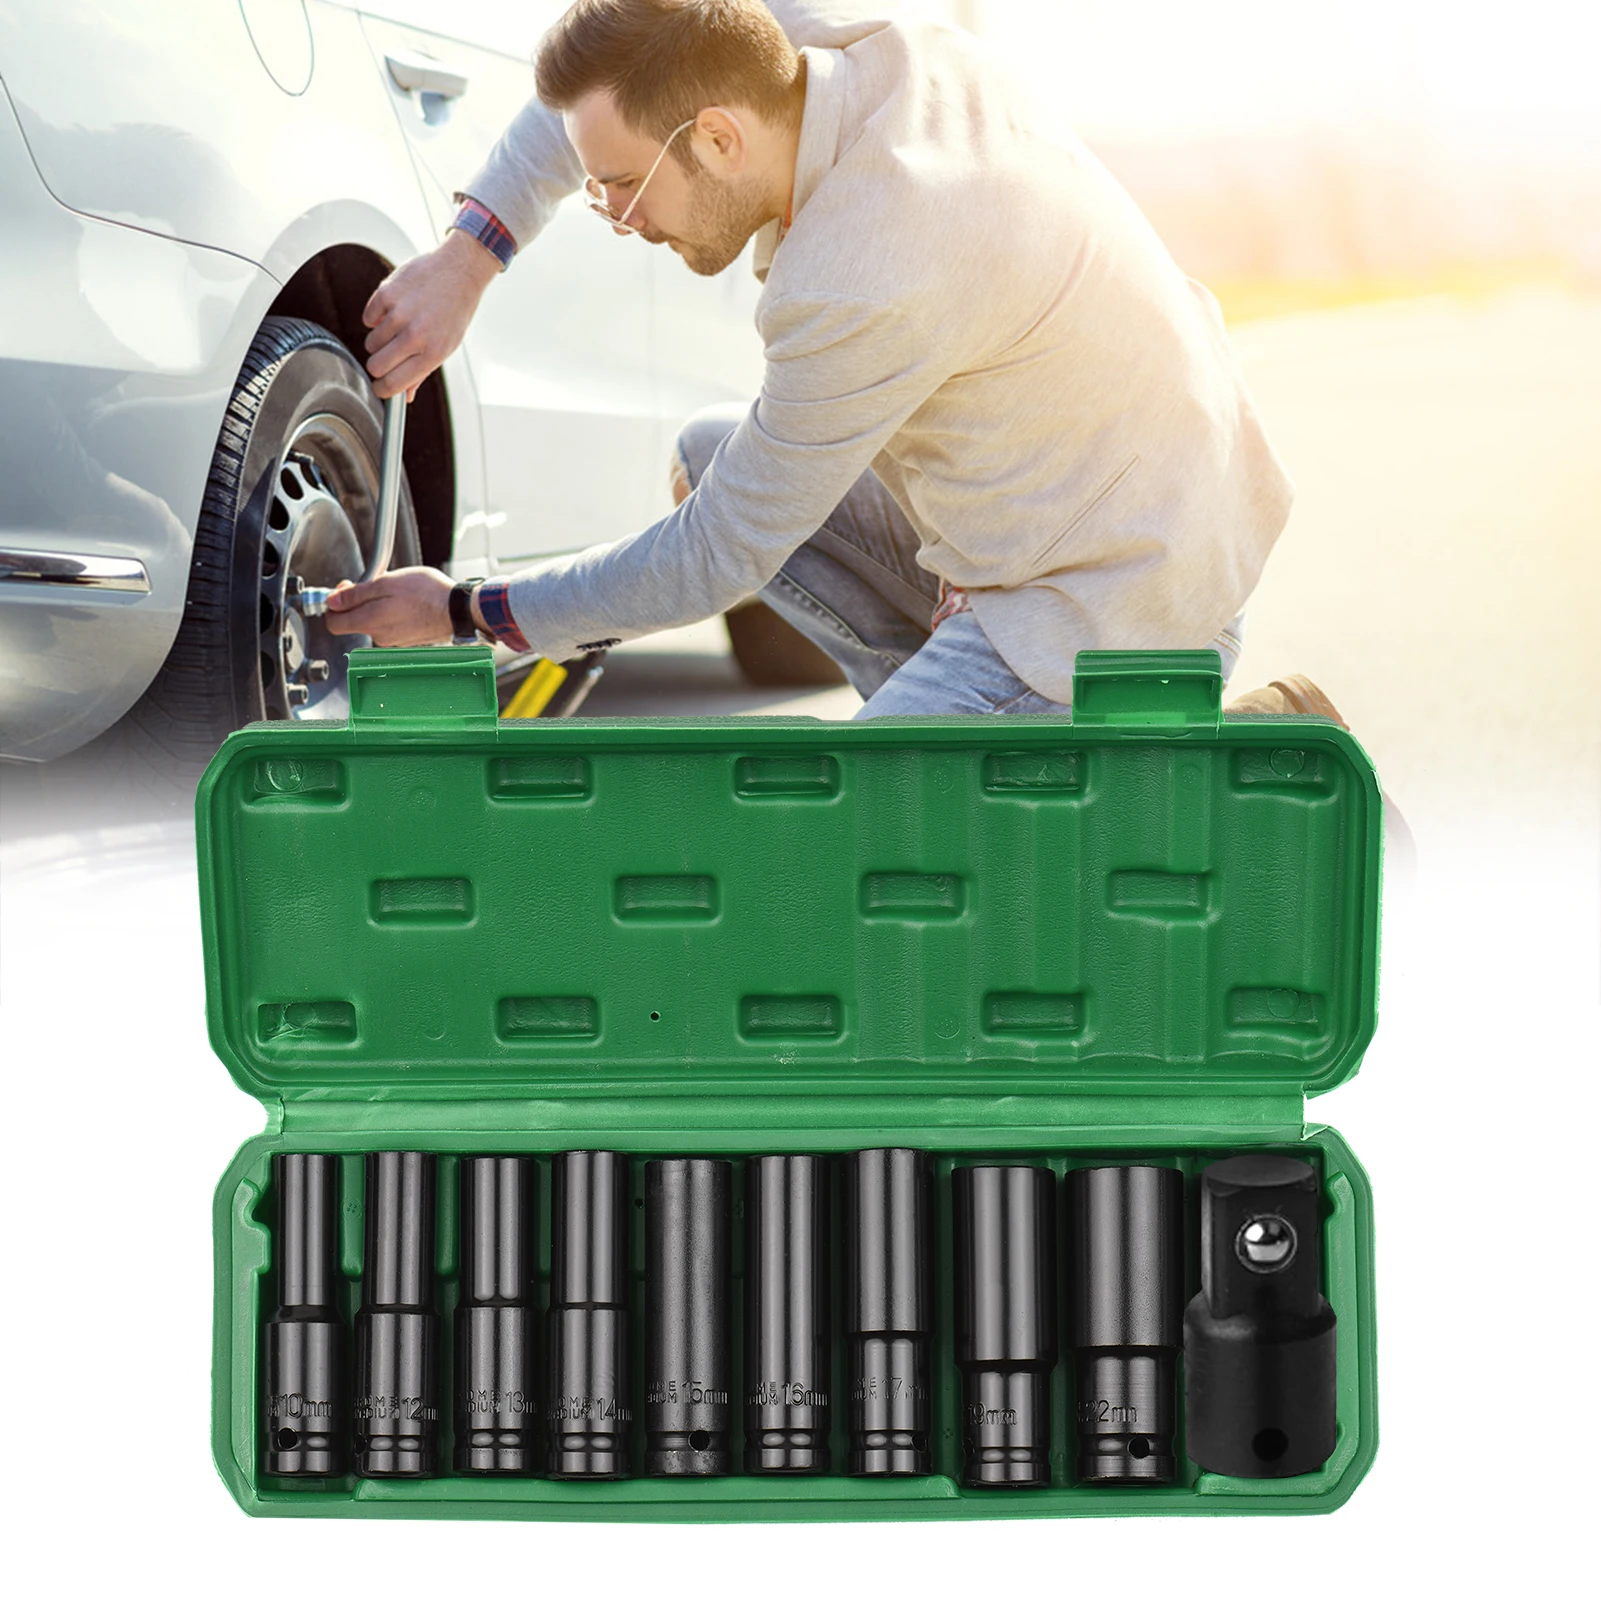 

1/2Inch Drive Hex Impact Socket Set 10-Piece Deep Socket Metric Sizes 10-24mm CR-V Material with Hard Storage Box